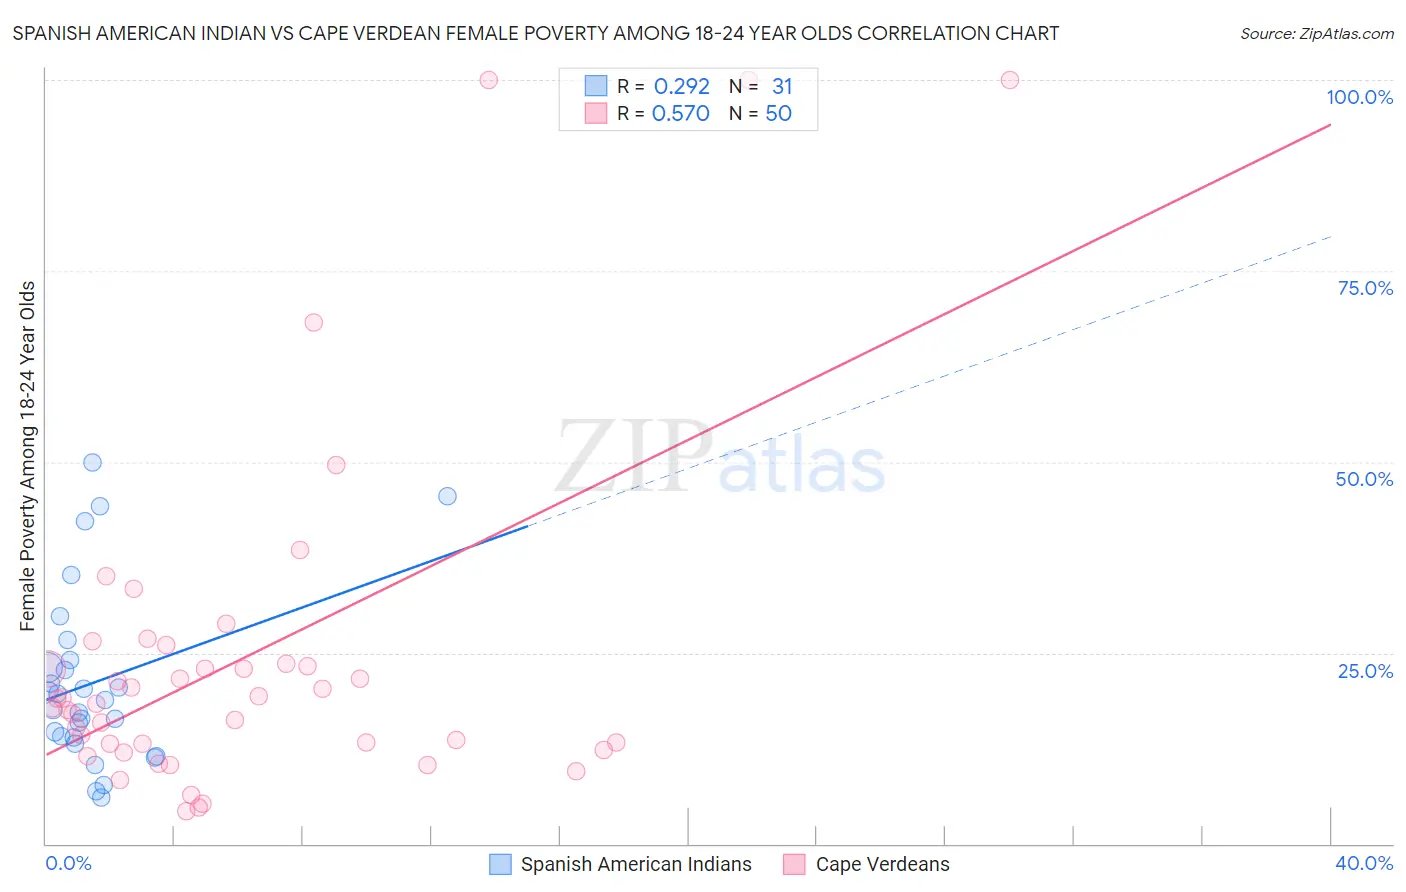 Spanish American Indian vs Cape Verdean Female Poverty Among 18-24 Year Olds